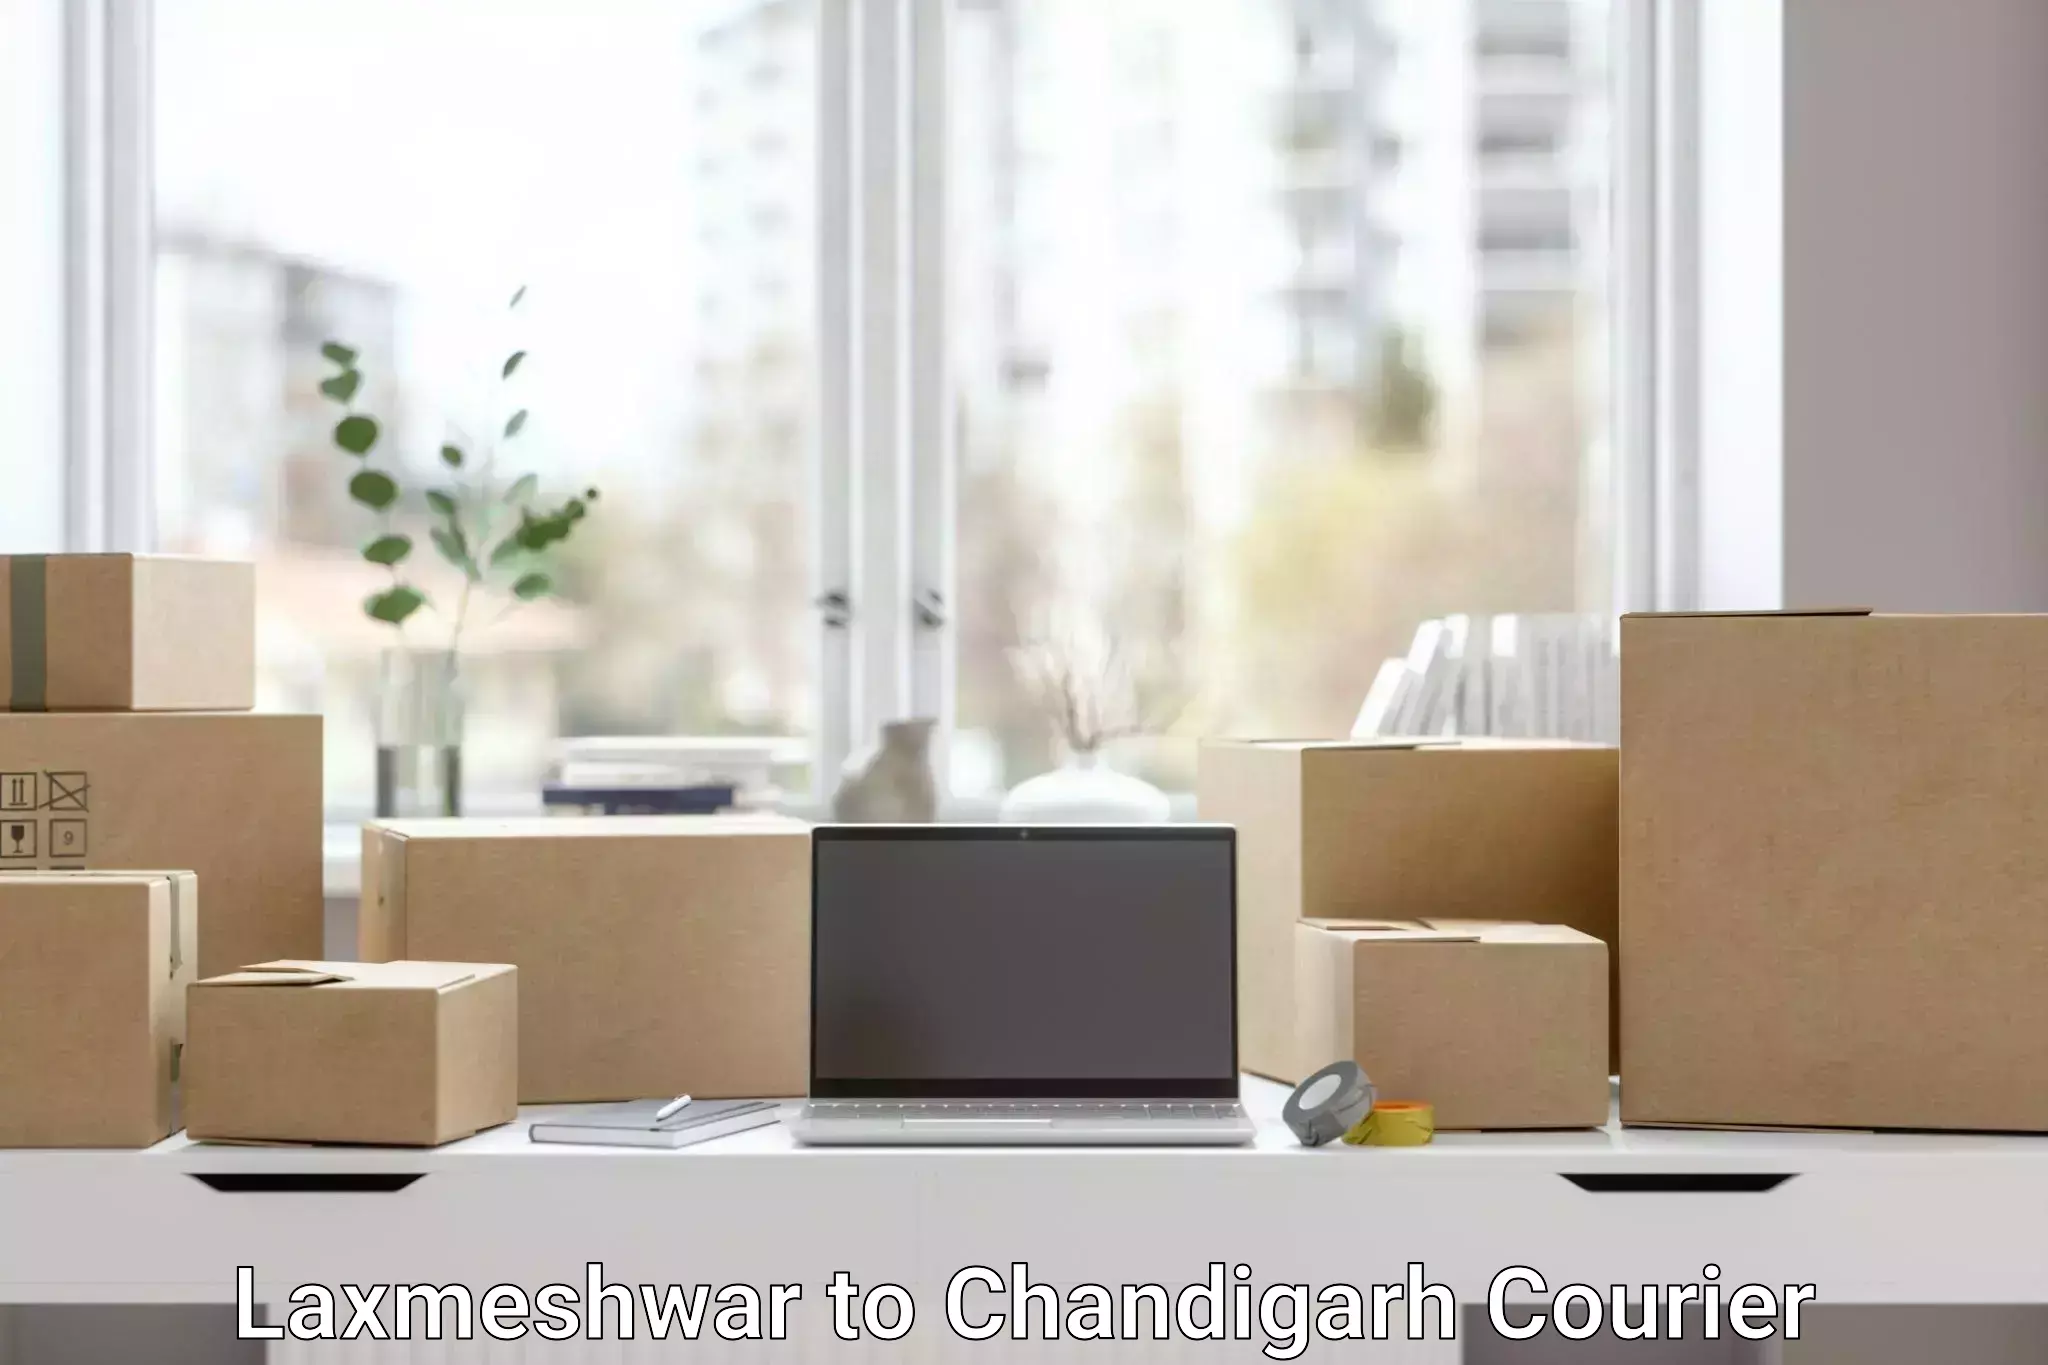 Same-day delivery options Laxmeshwar to Chandigarh